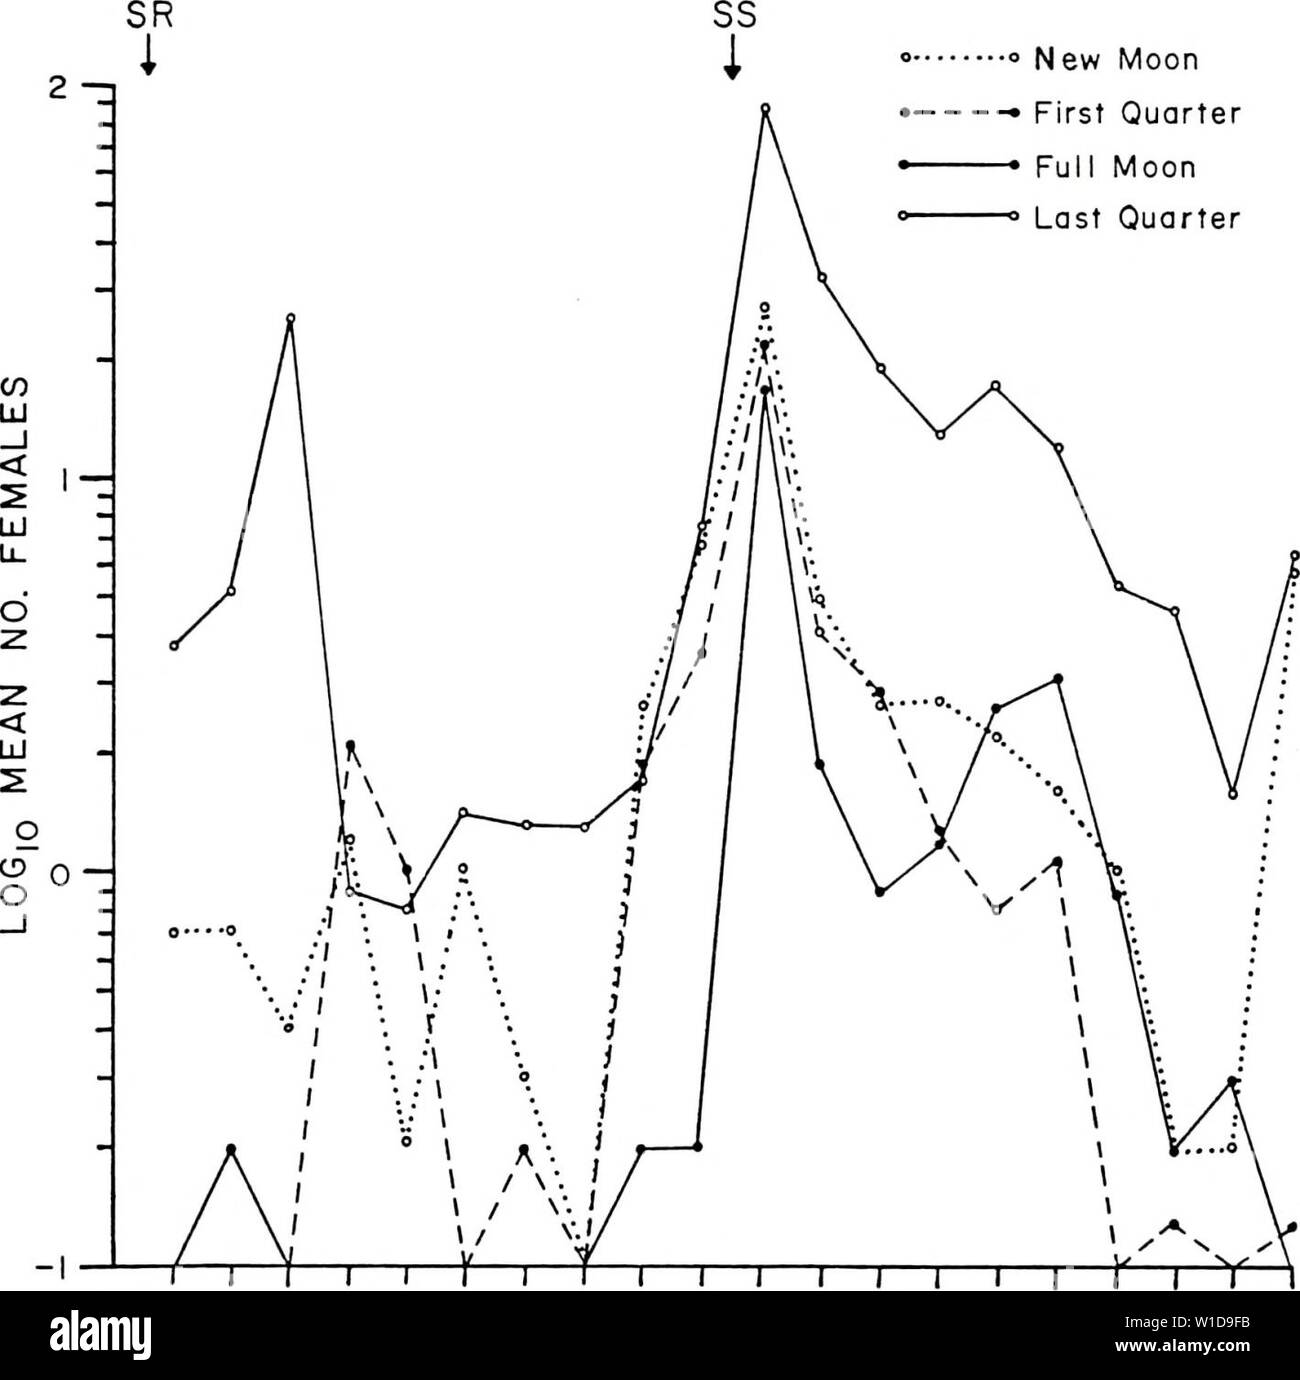 Archive image from page 95 of Diel and seasonal activities of. Diel and seasonal activities of Culicoides spp. Near Yankeetown, Florida . dielseasonalacti00lill Year: 1985  84    6 8 10 12 14 COLLECTION PERIOD 16 18 20 Figure 25. Diel periodicity of C . furens females collected in a vehicle-mounted trap on quarter phases of moon in the fall. Stock Photo